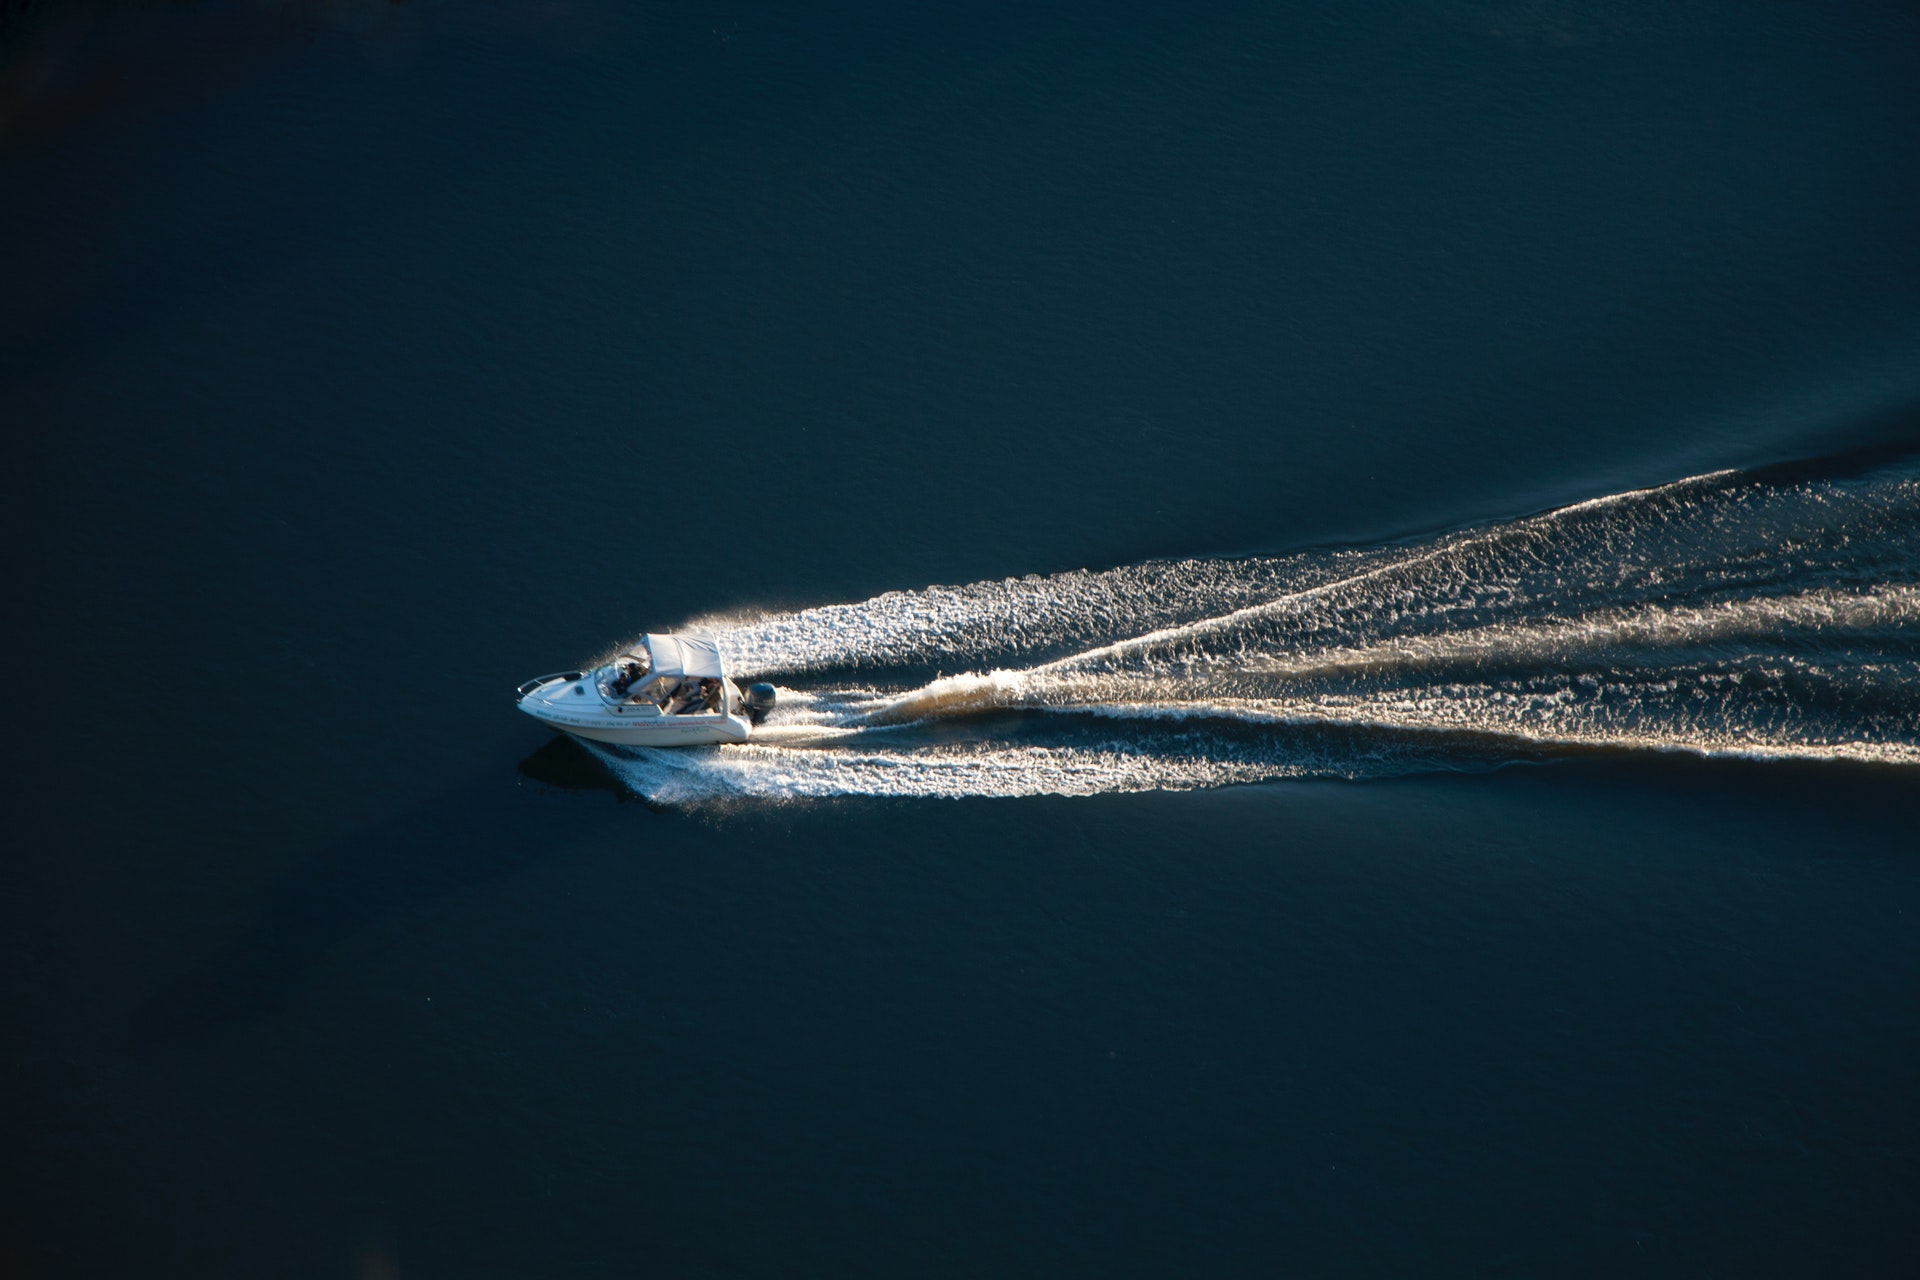 Motorboat cruising on open water in aerial photograph